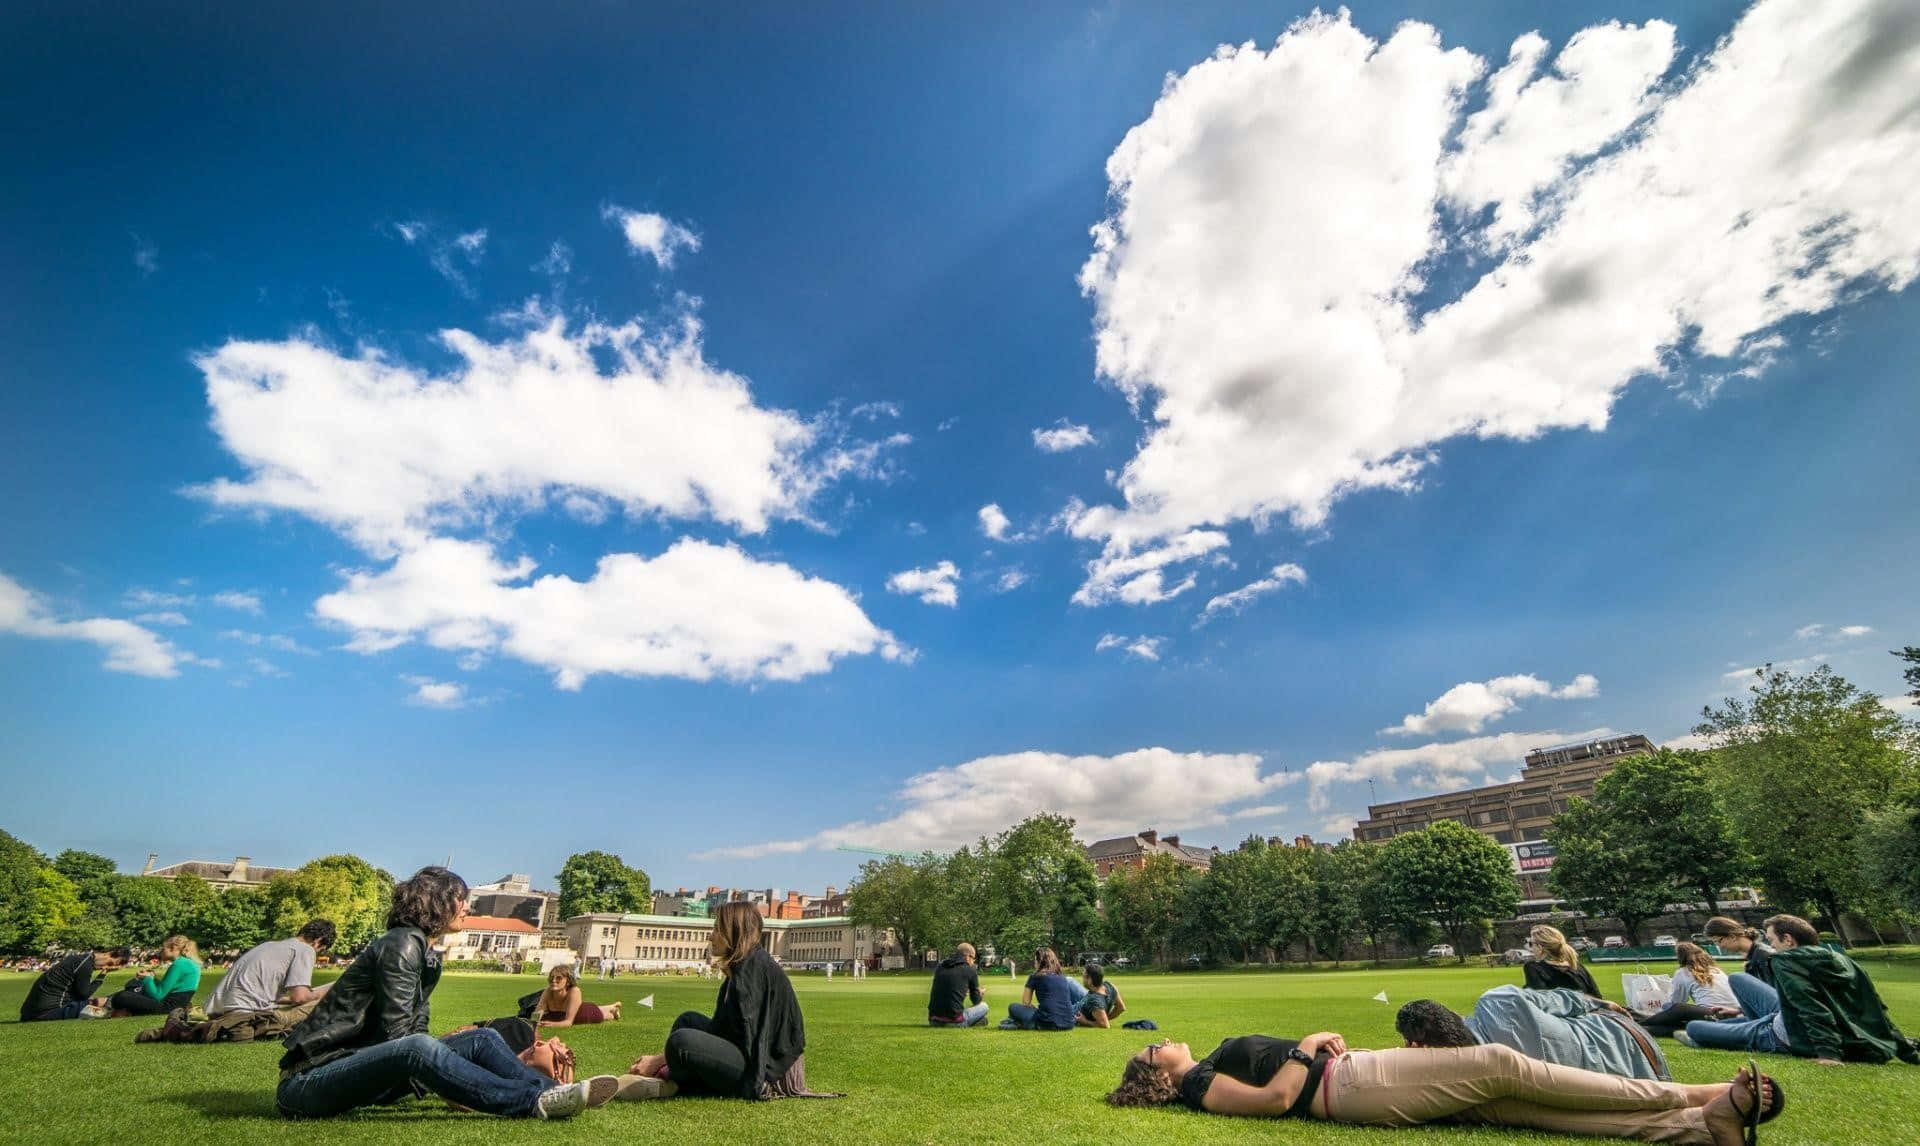 Students Relaxing On Campus Lawn